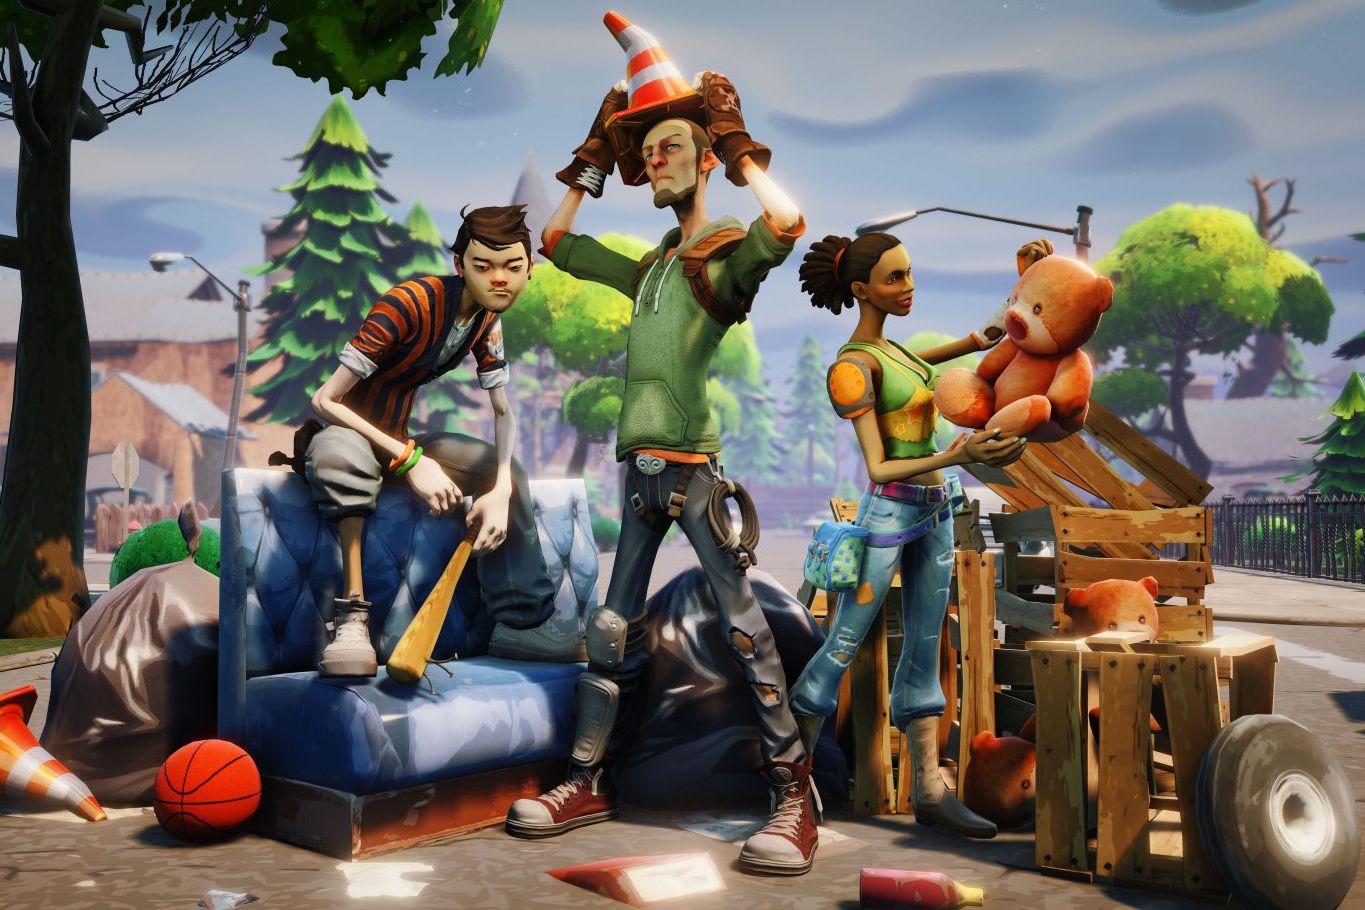 Epic Reveals It Made $50 Million From One Set Of 'Fortnite' Skins